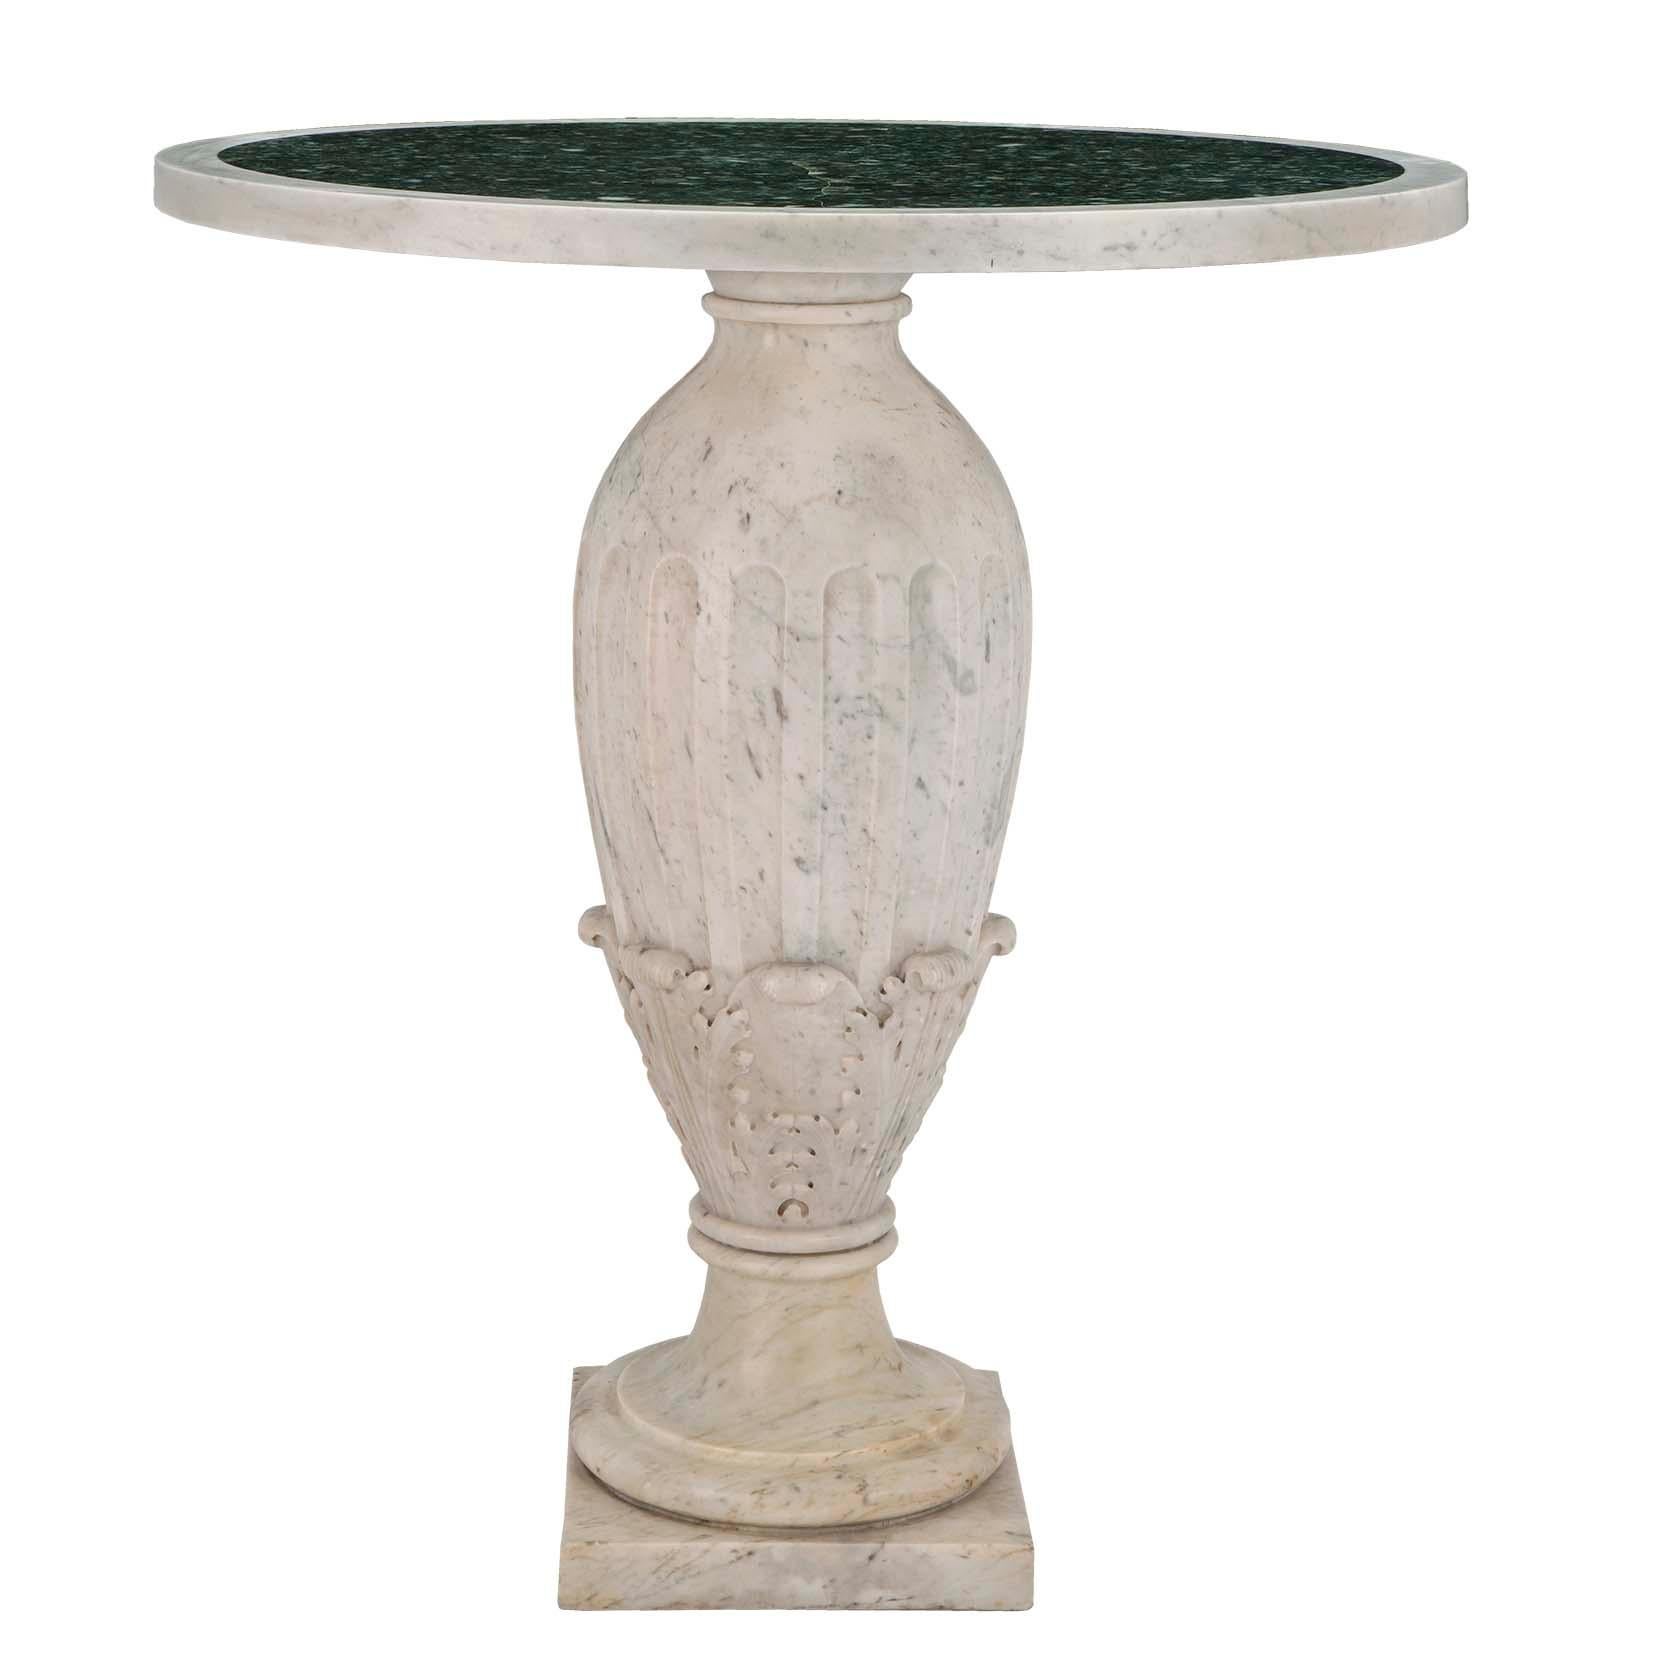 A striking pair of Italian 19th century Louis XVI St. marble tables. Each table is raised by a square white Carrara marble base below the mottled socle pedestal. The central baluster shaped support is decorated with richly carved large acanthus